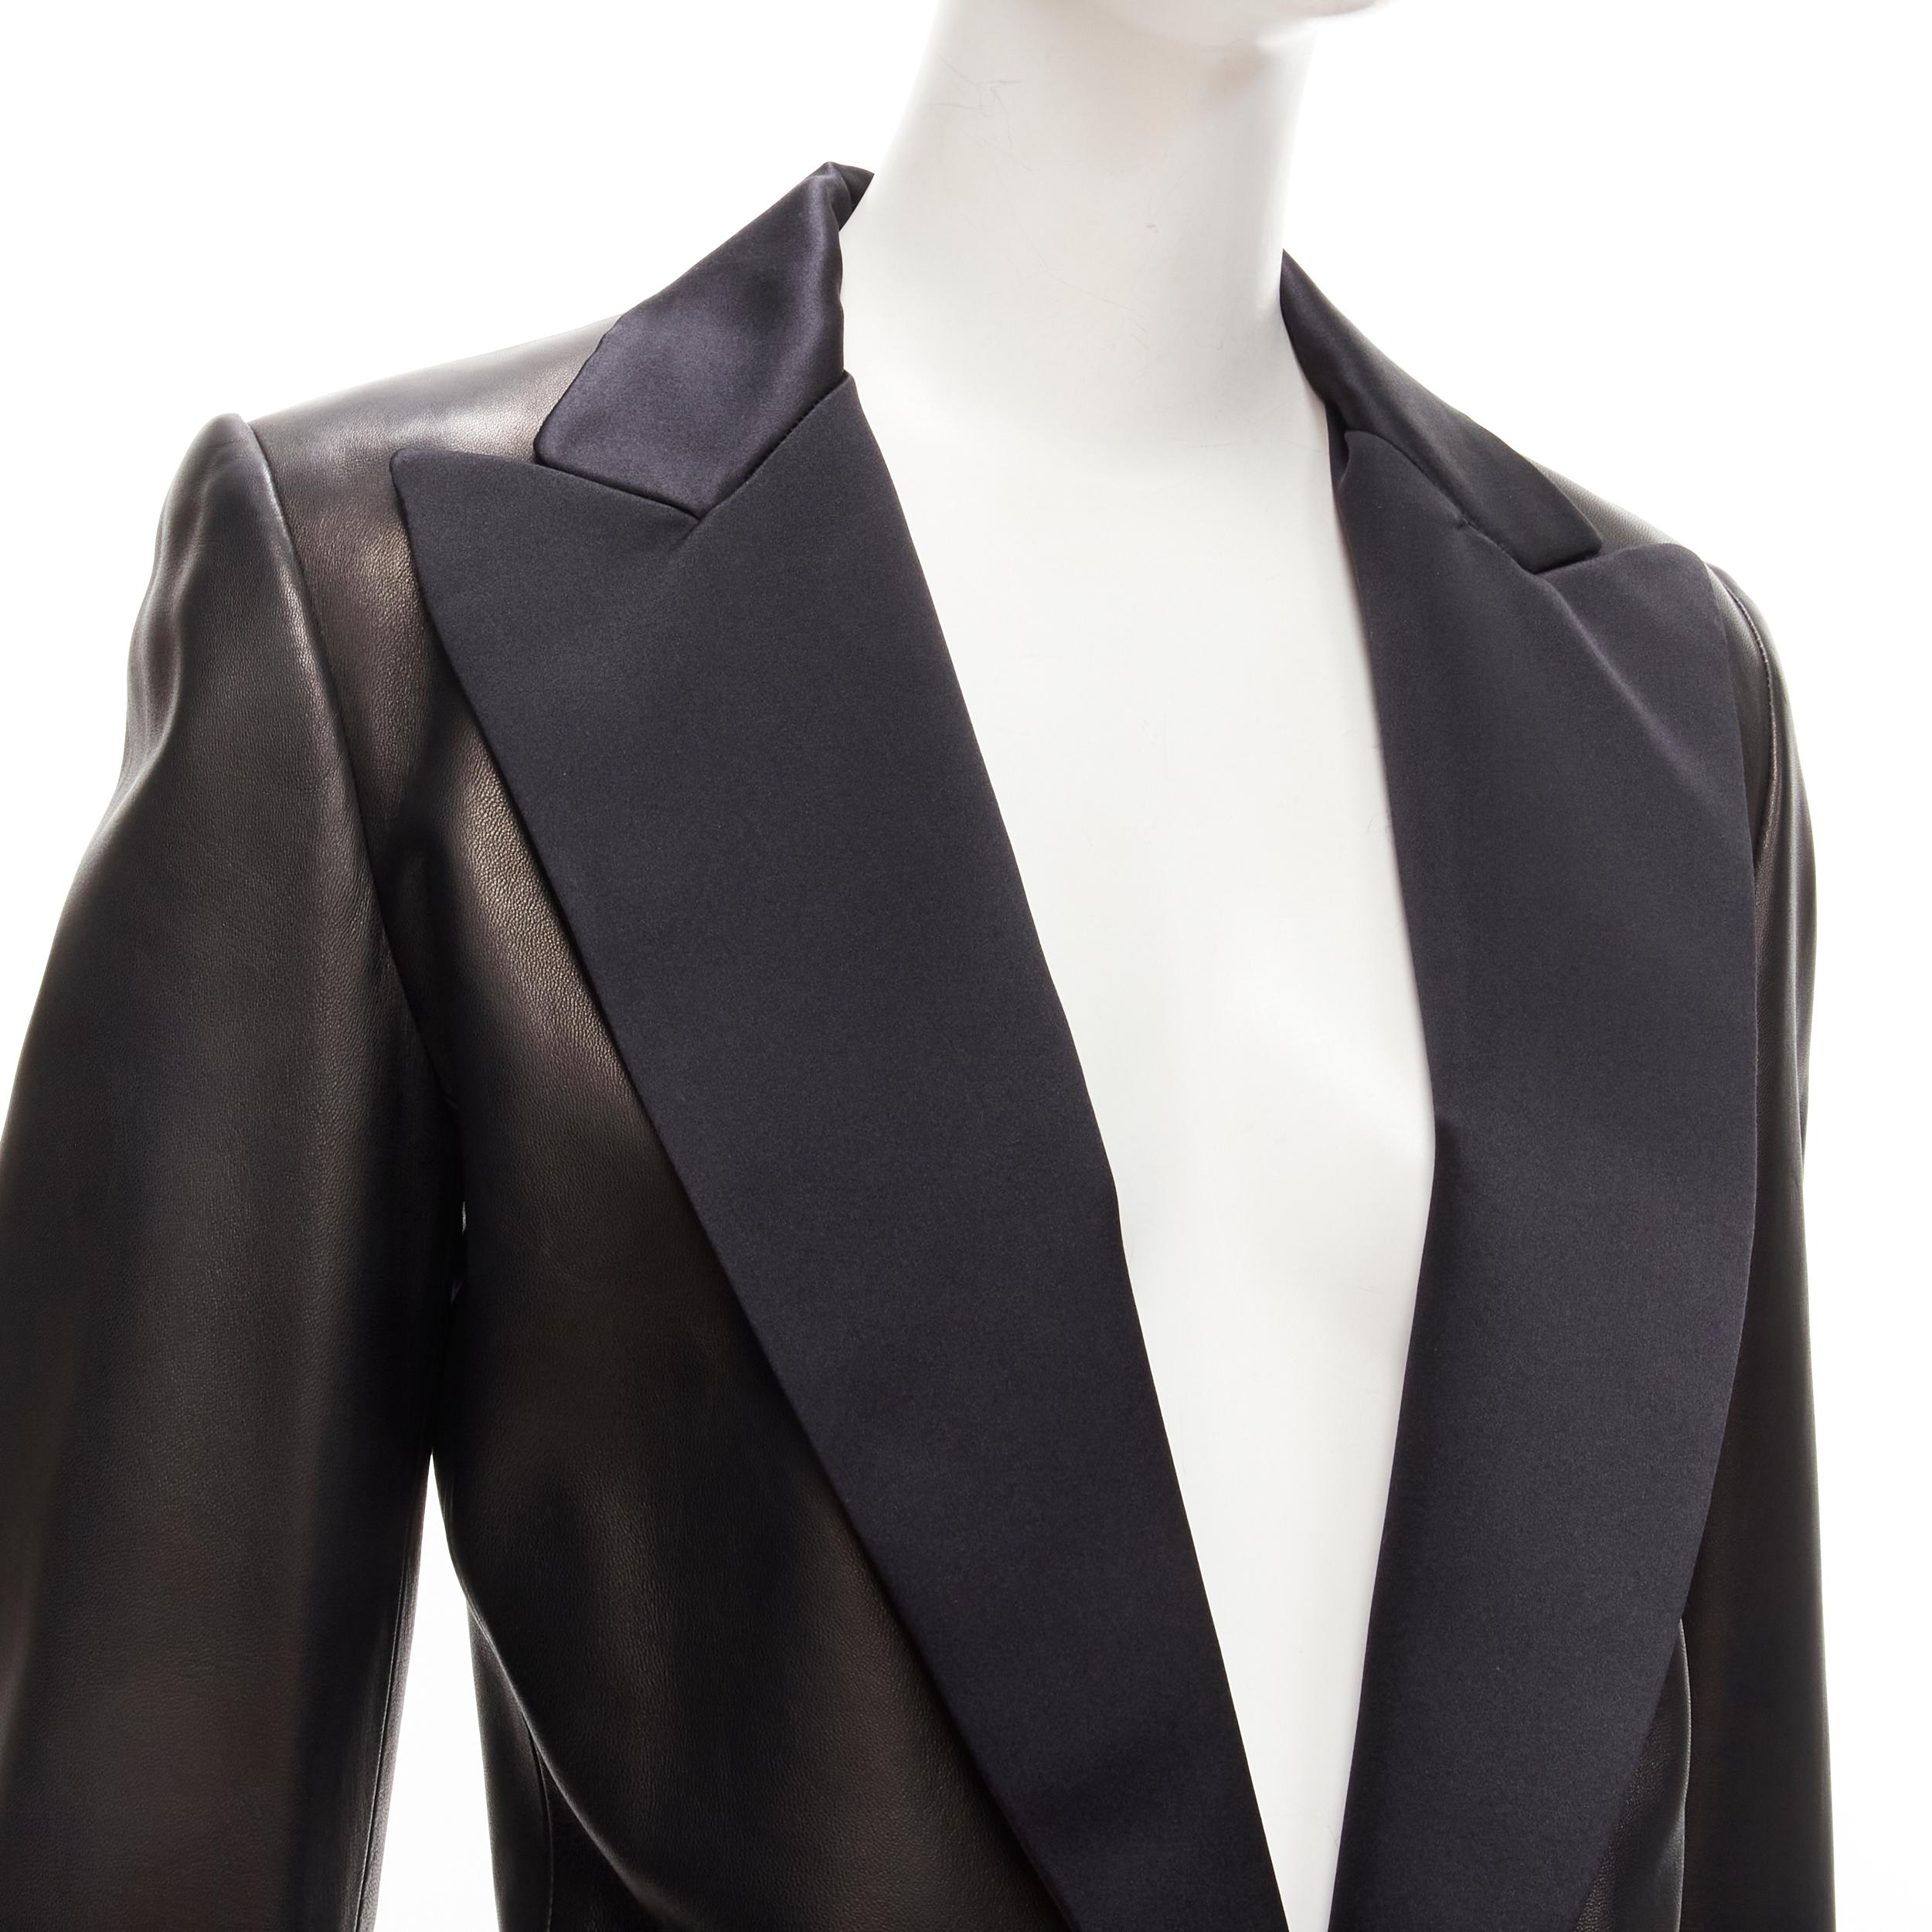 GIANNI VERSACE 1995 Vintage black satin peak lapel leather coat IT40 S
Reference: TGAS/C01962
Brand: Gianni Versace
Designer: Gianni Versace
Collection: 1995
Material: Leather, Satin
Color: Black
Pattern: Solid
Closure: Button
Lining: Black